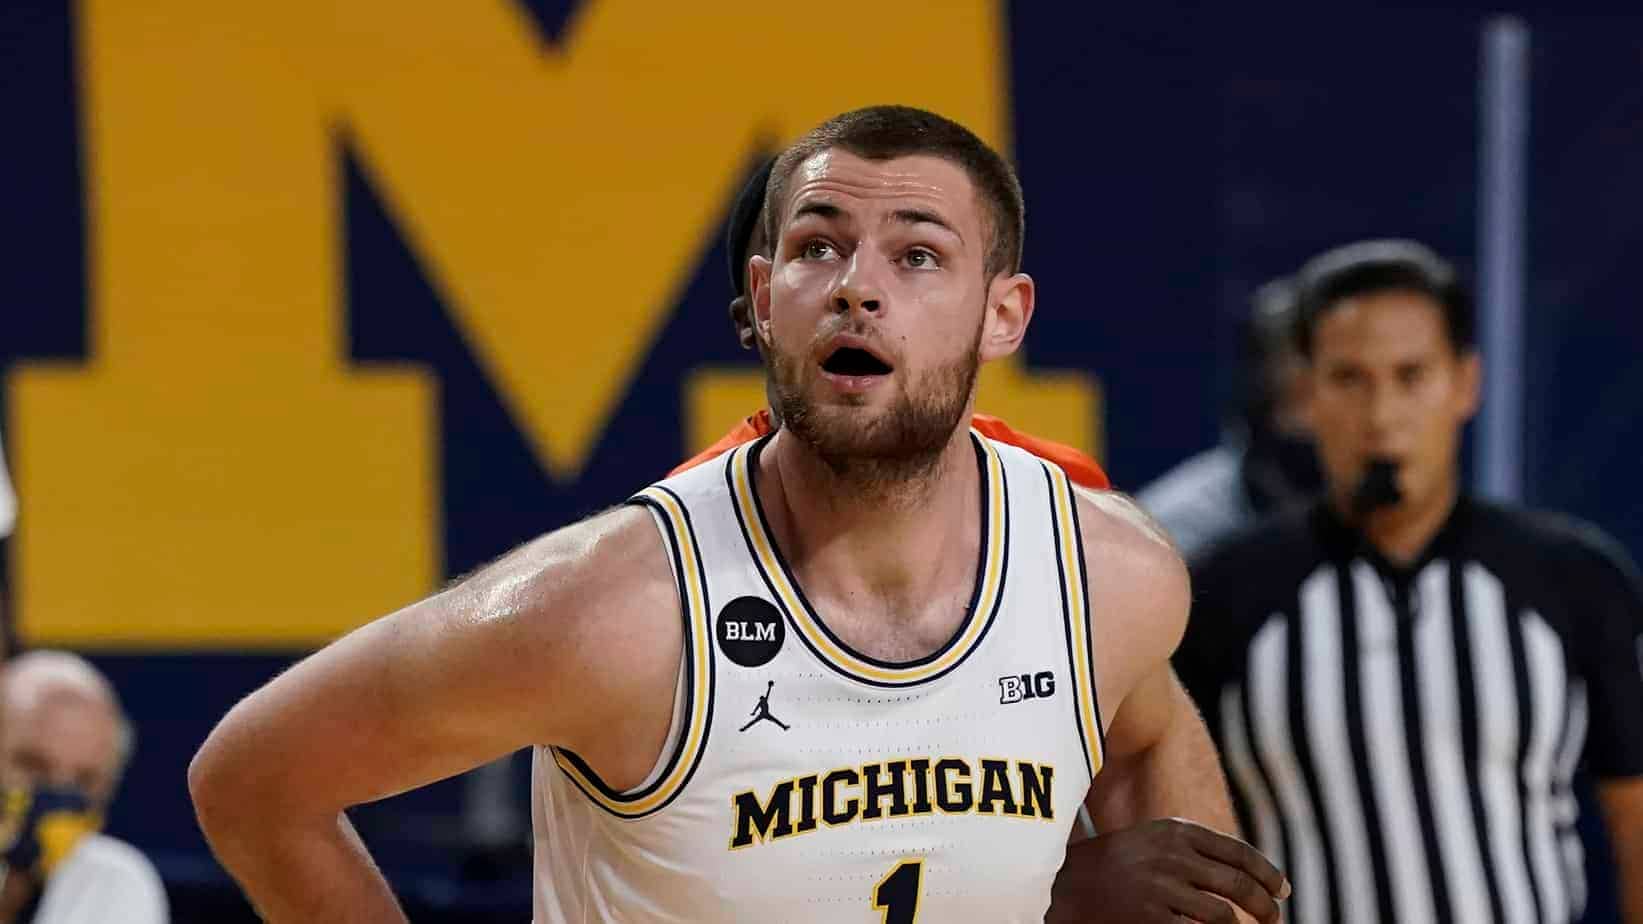 What the latest Michigan NCAA Tournament odds say about their chances to receive a bid to "The Big Dance" and avoid the NIT